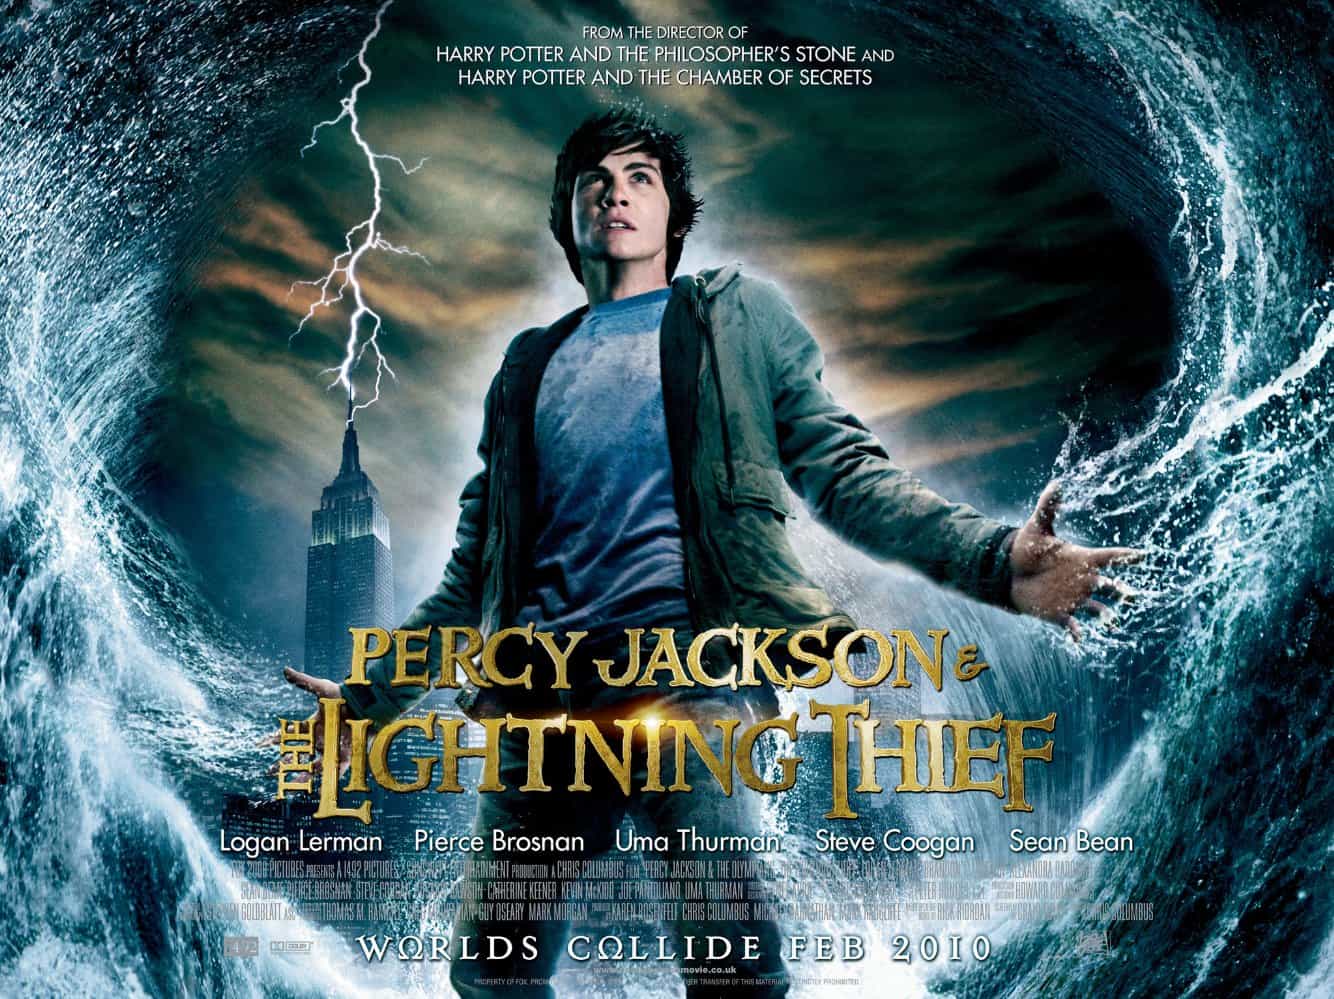 Percy Jackson and the Olympians: The Lighting Thief - Movie Review